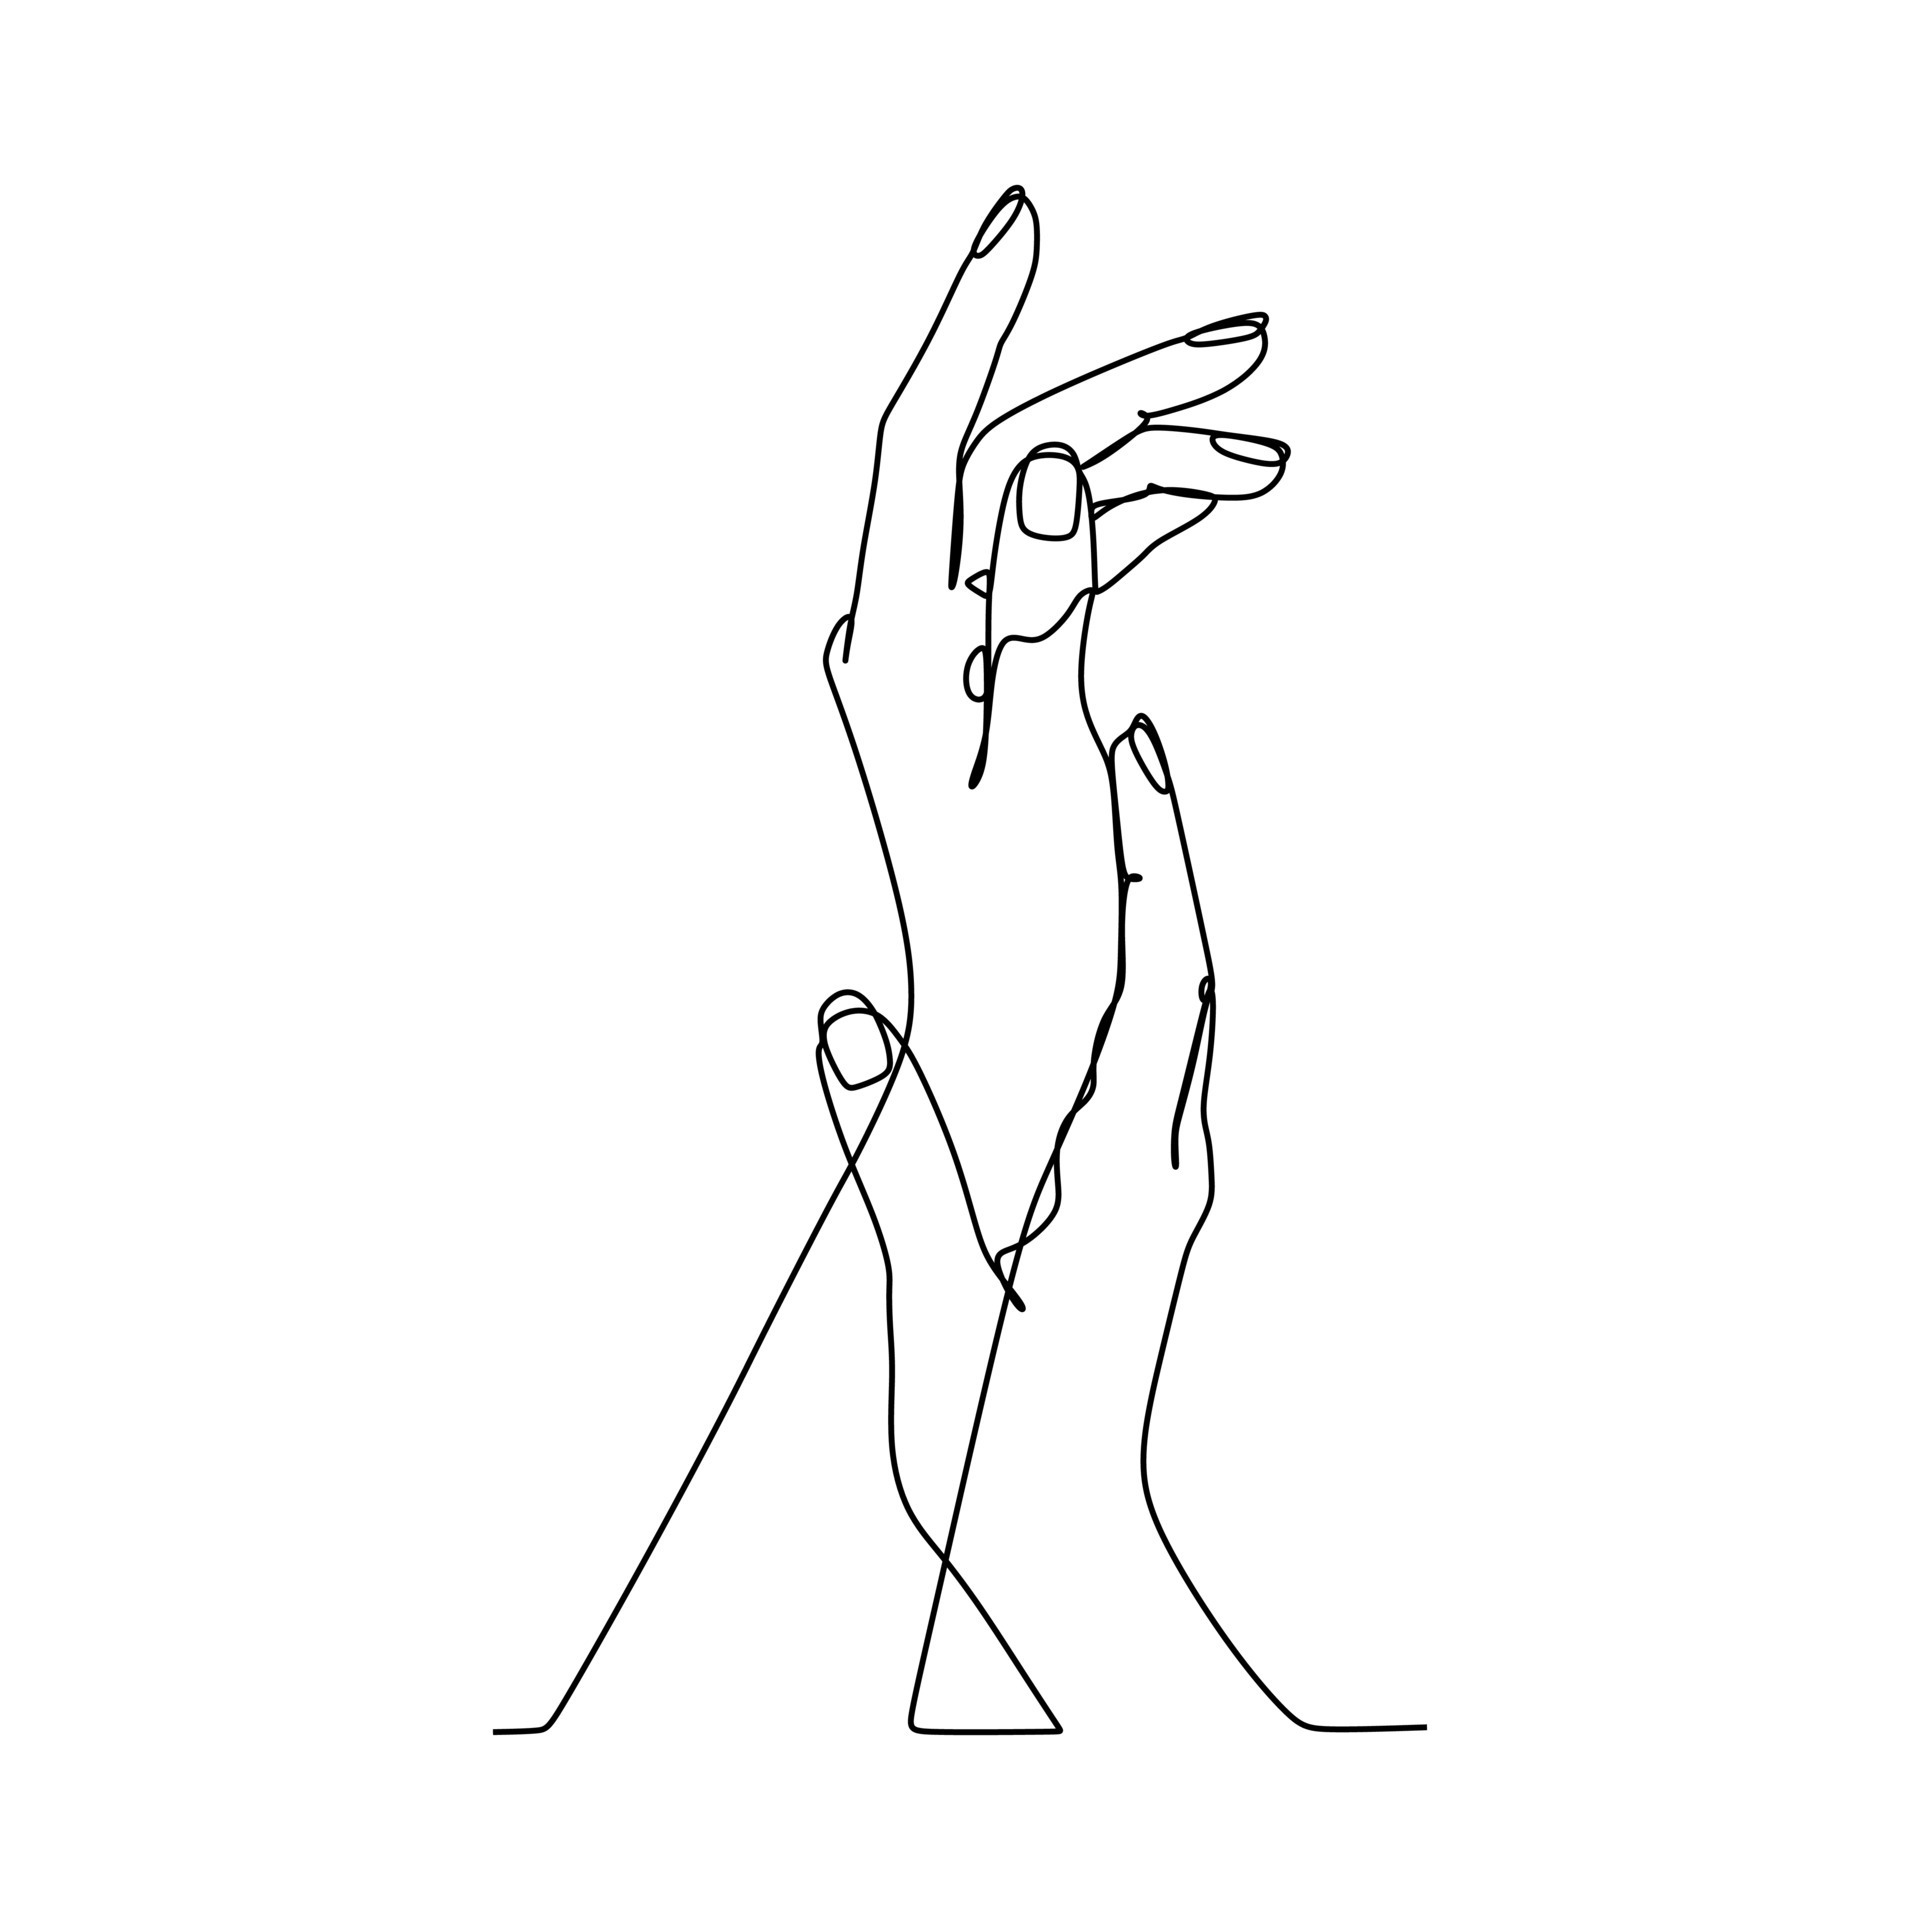 Hands holding each other gesture continuous line drawing design. Sign ...